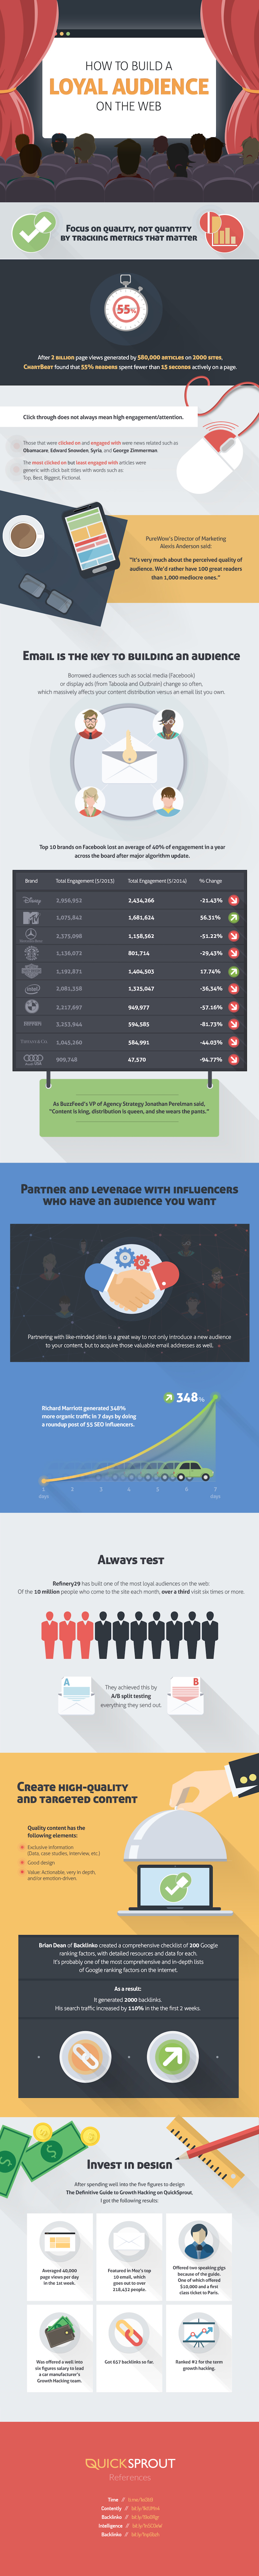 How to Build a Loyal Audience on the Web